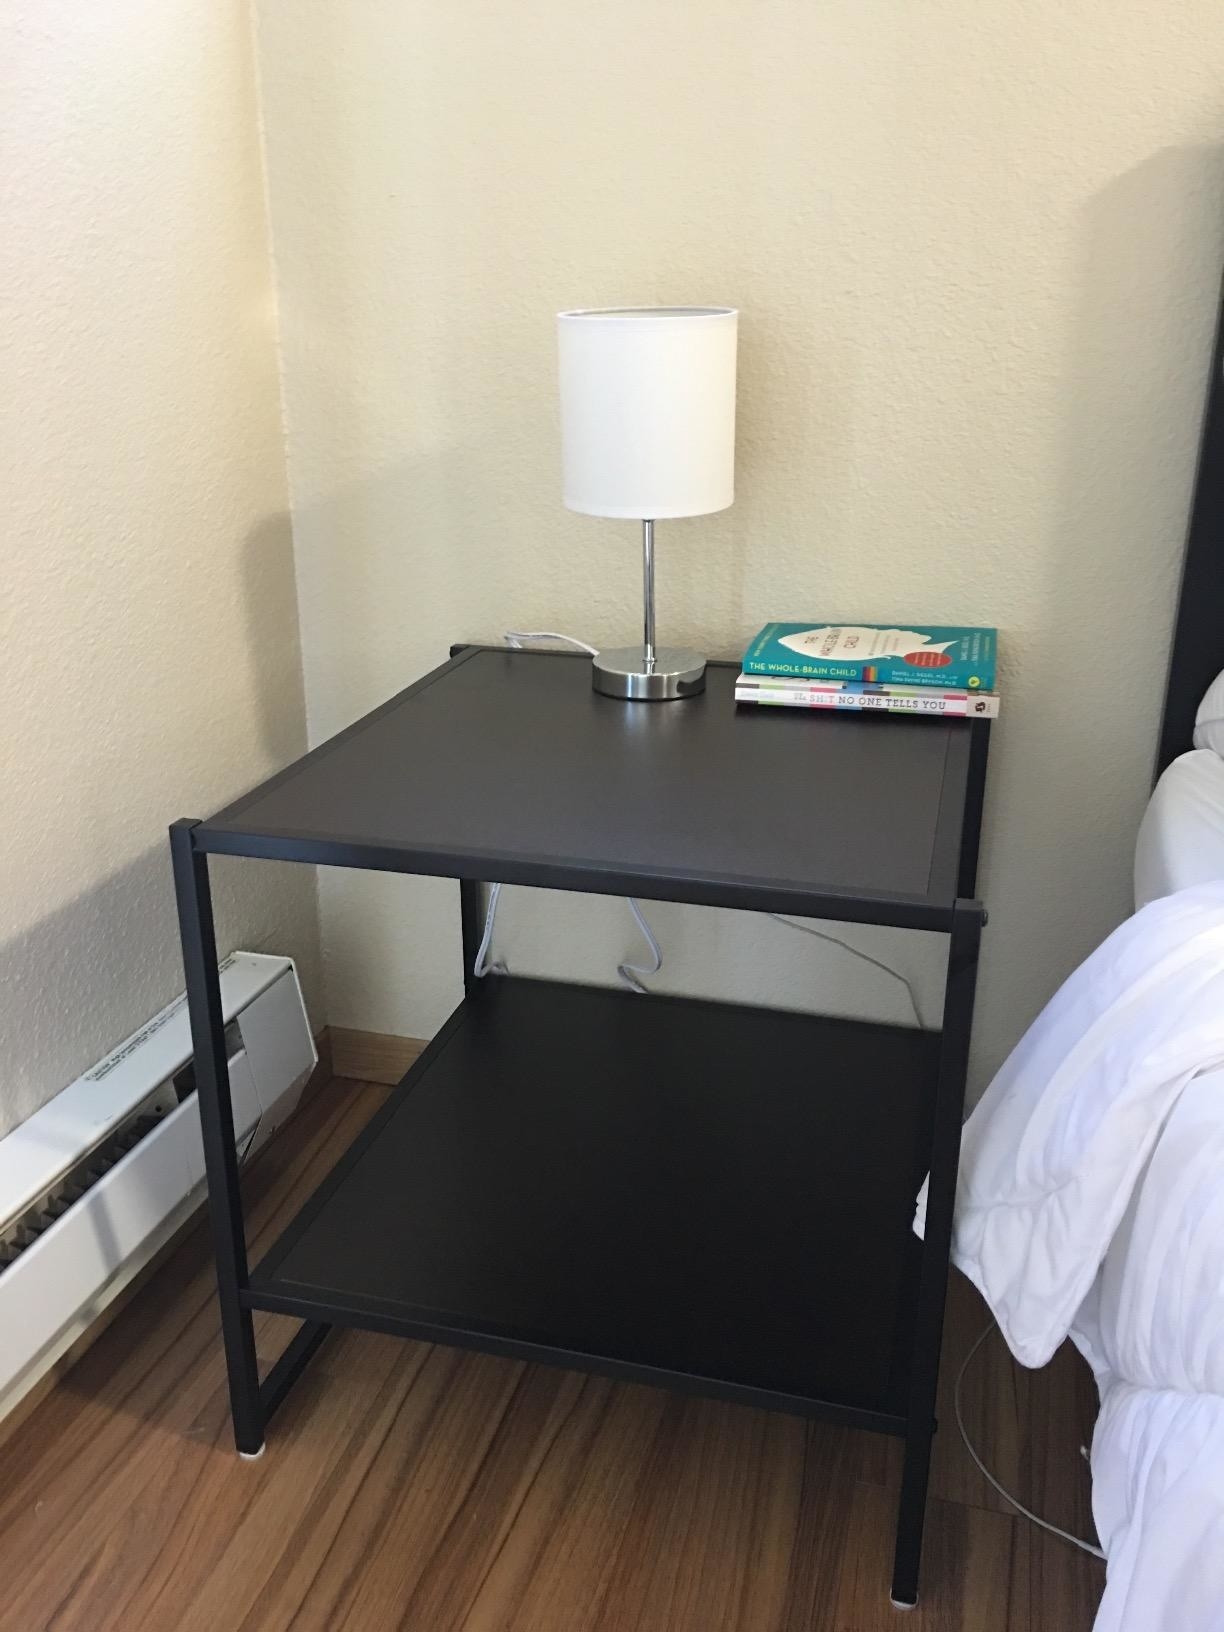 The nightstand, which is rectangular and open, with one shelf and a flat top surface